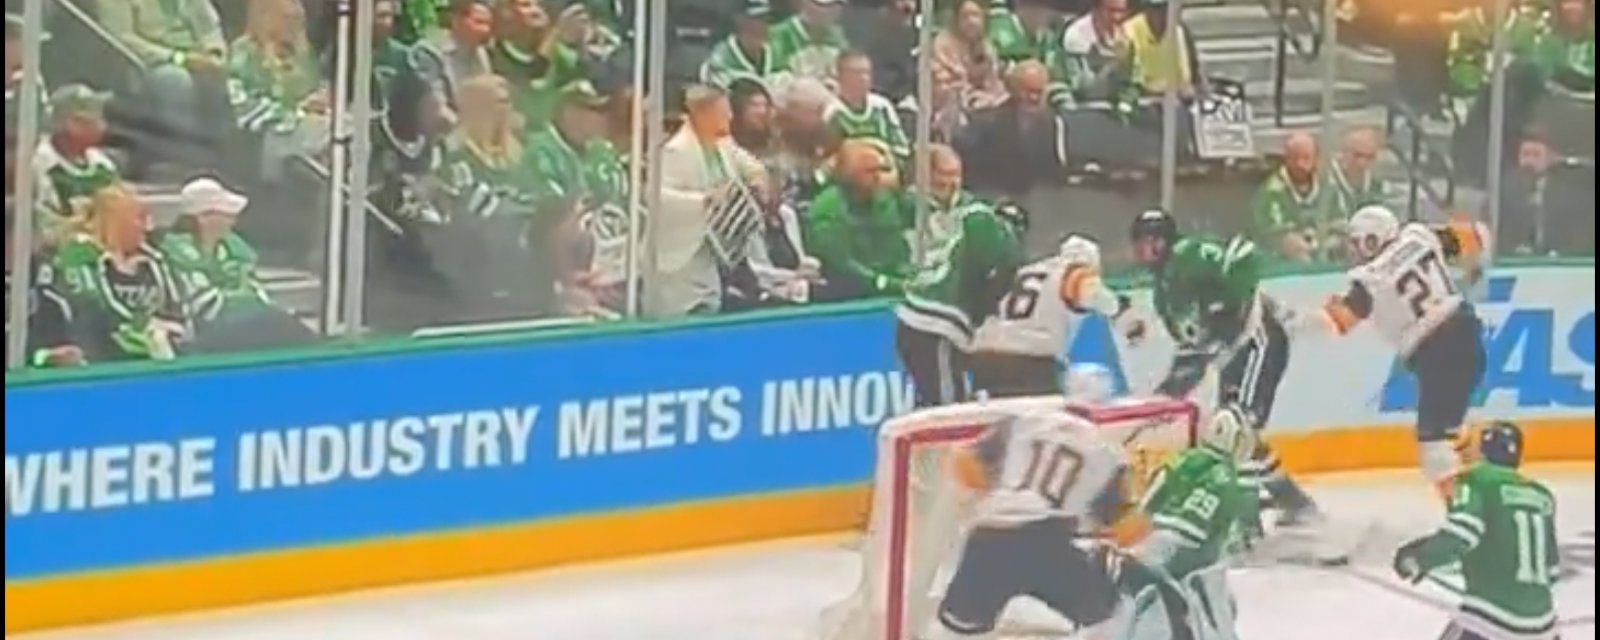 One fan banned from potential Game 7 in Dallas because of unacceptable behaviour!